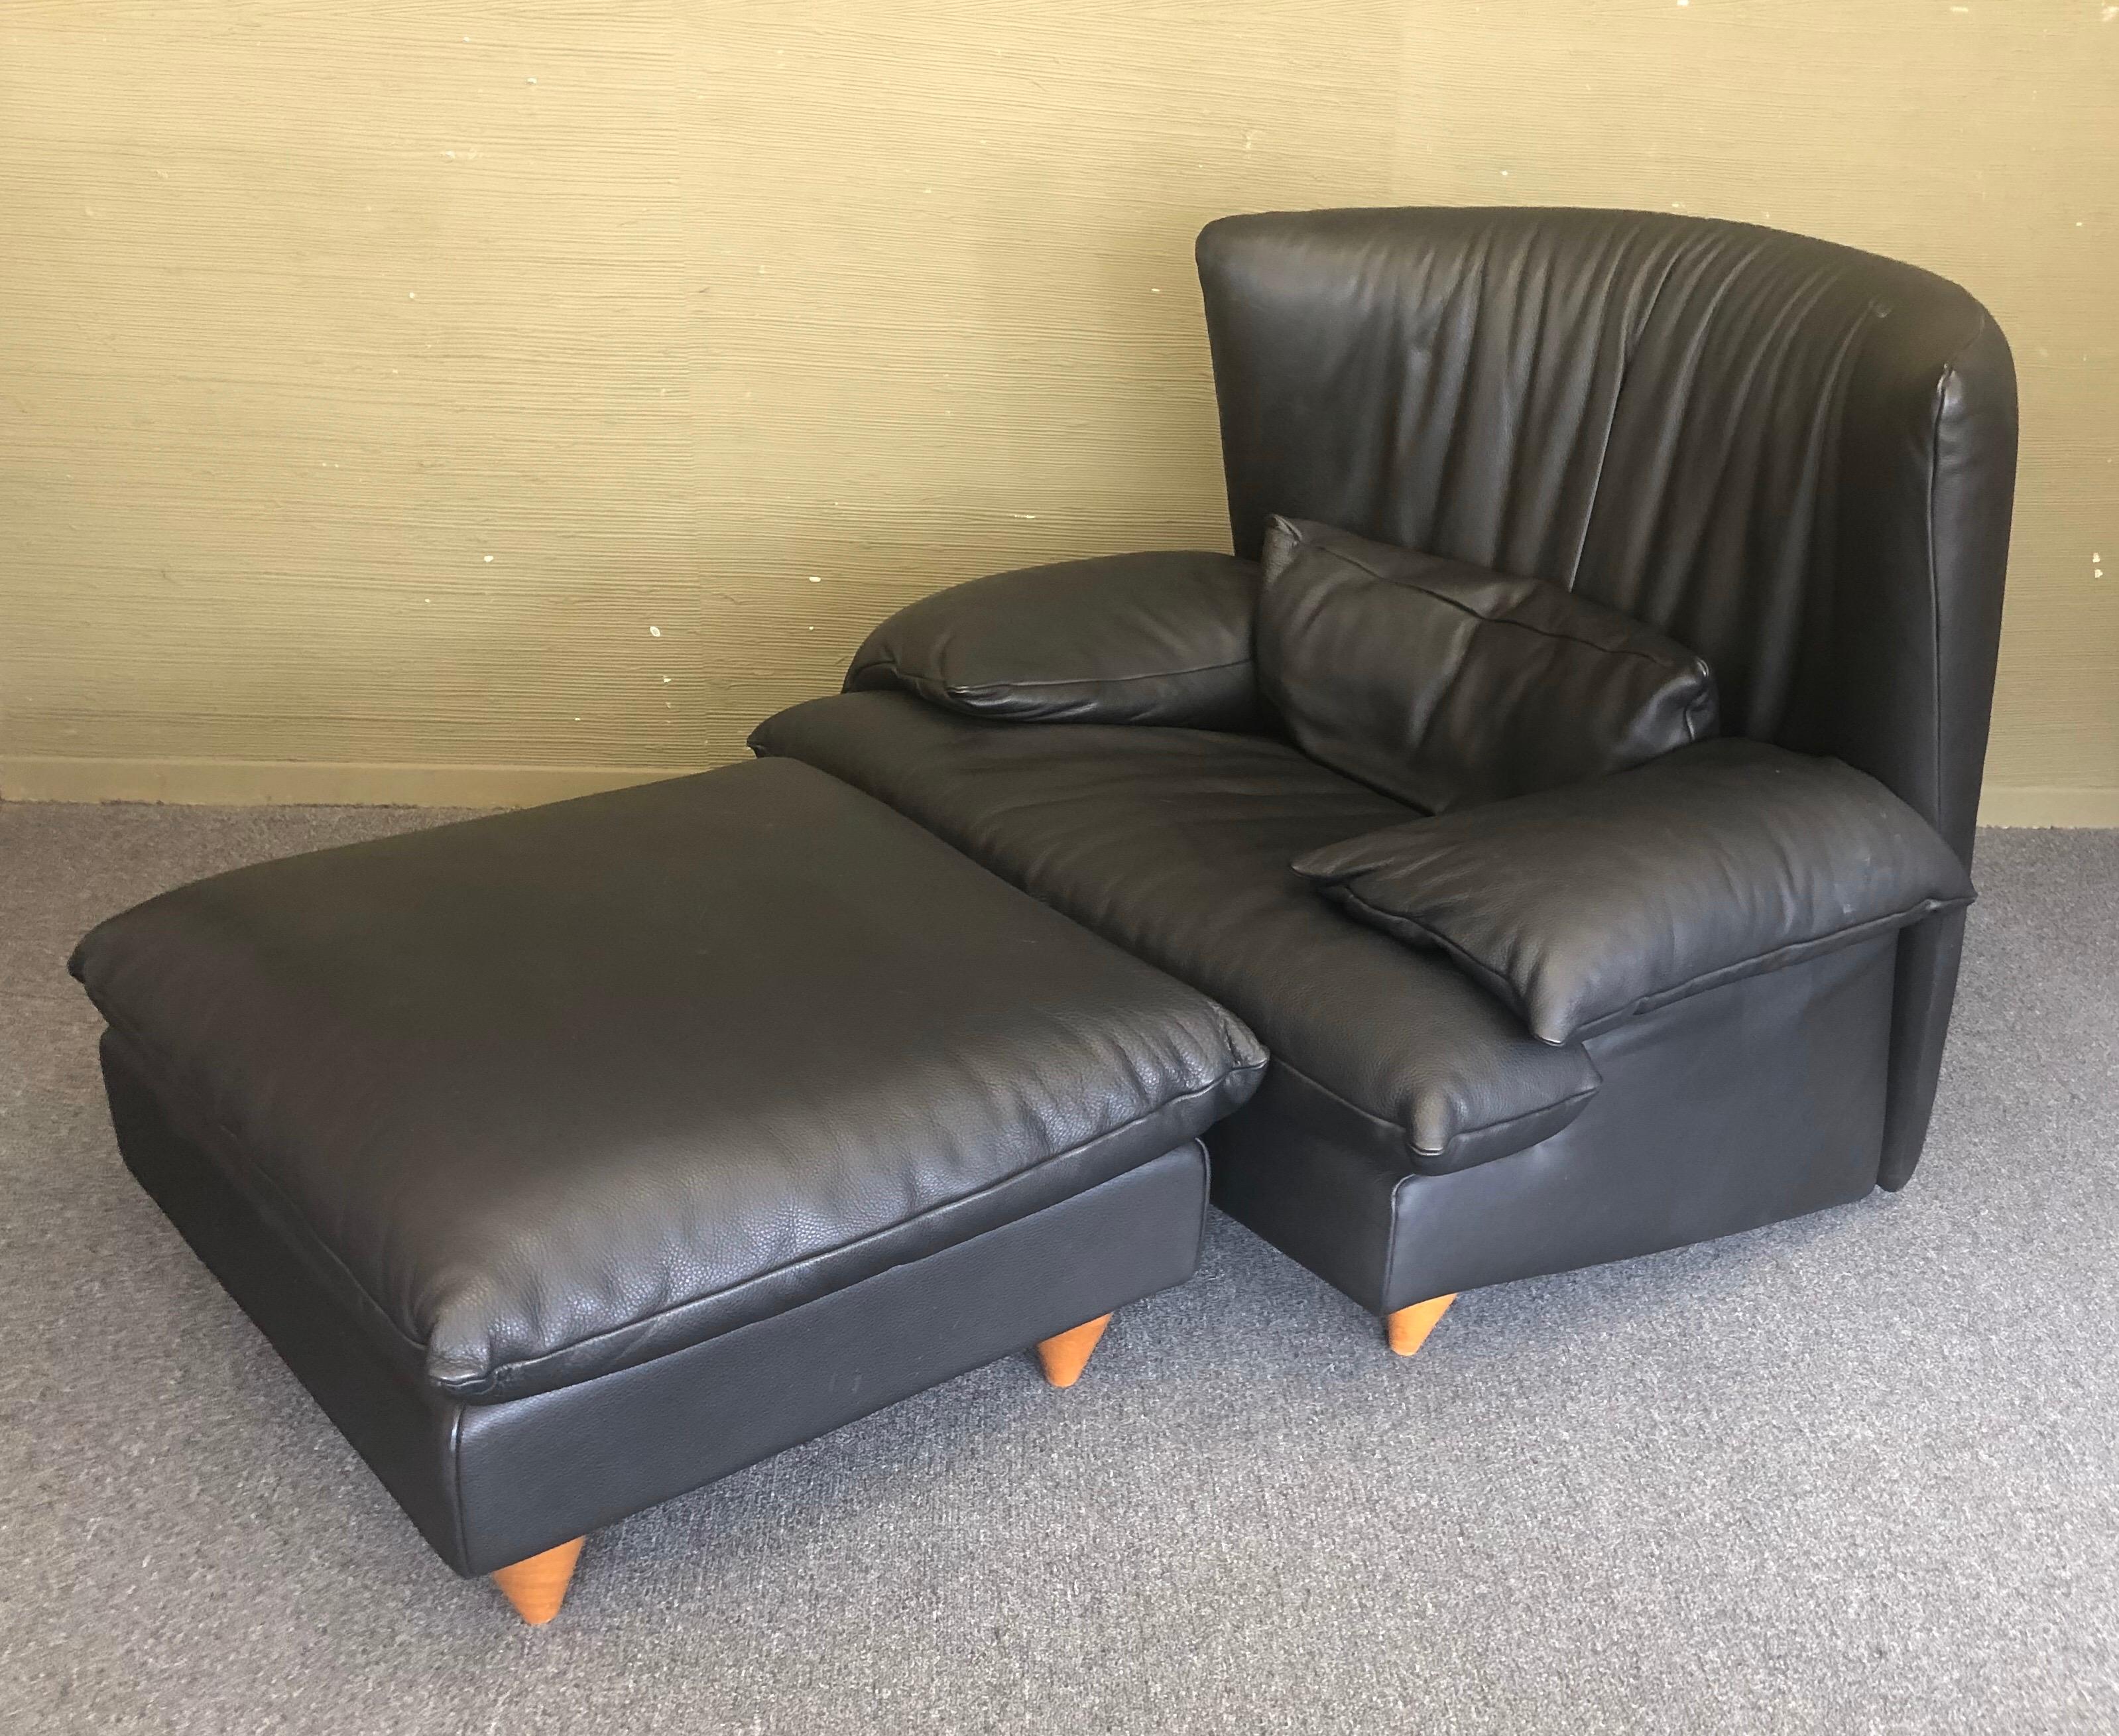 A very nice black leather Postmodern lounge chair and ottoman by I4 Mariani for the Pace Collection, circa late 1980s. The piece is in great condition with super high quality leather and Italian craftsmanship. Comes with a lumbar pillow. Ottoman